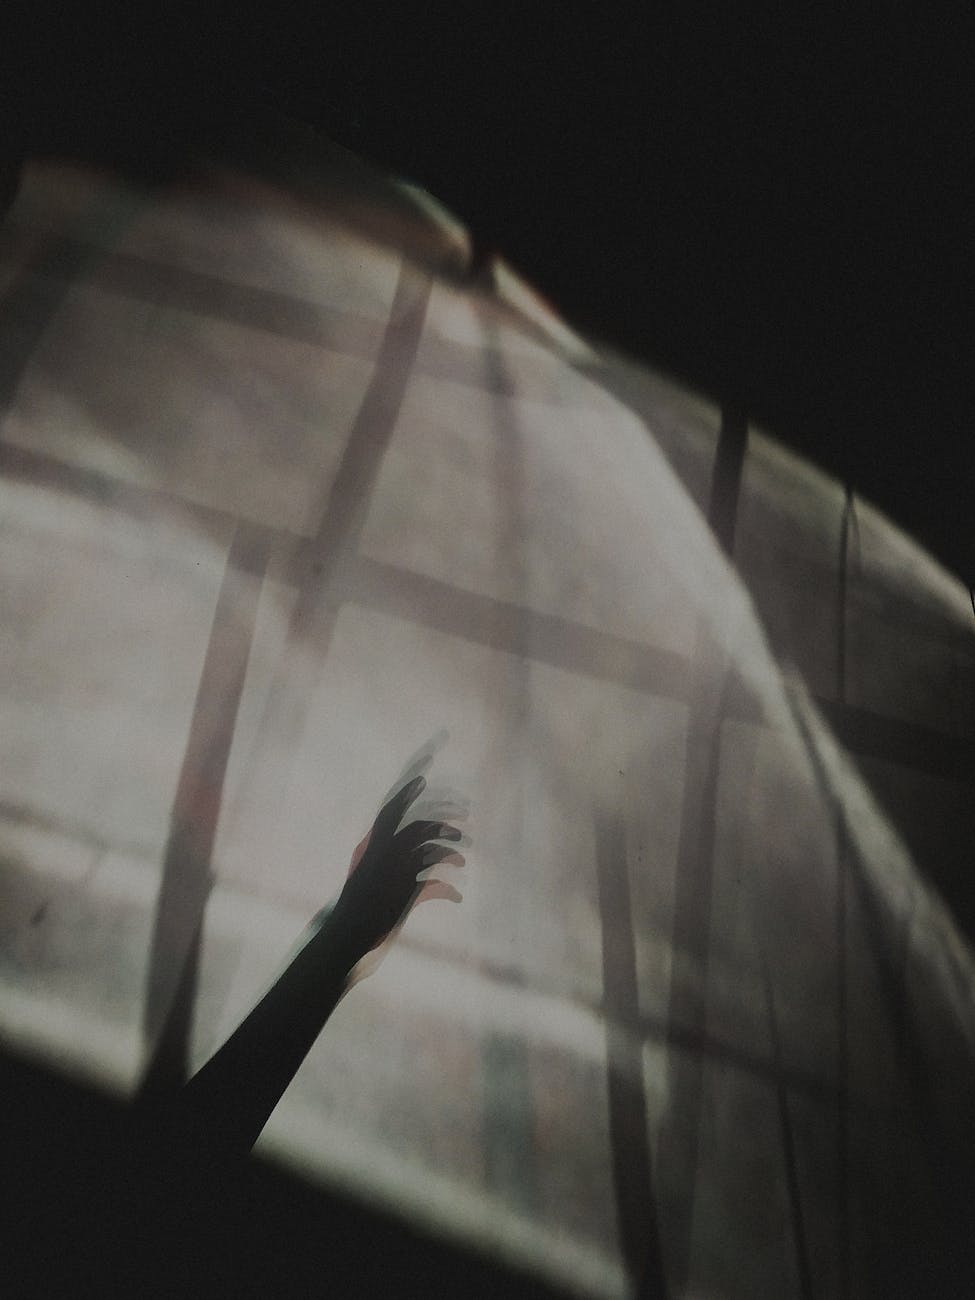 blurred silhouette of a hand reaching out